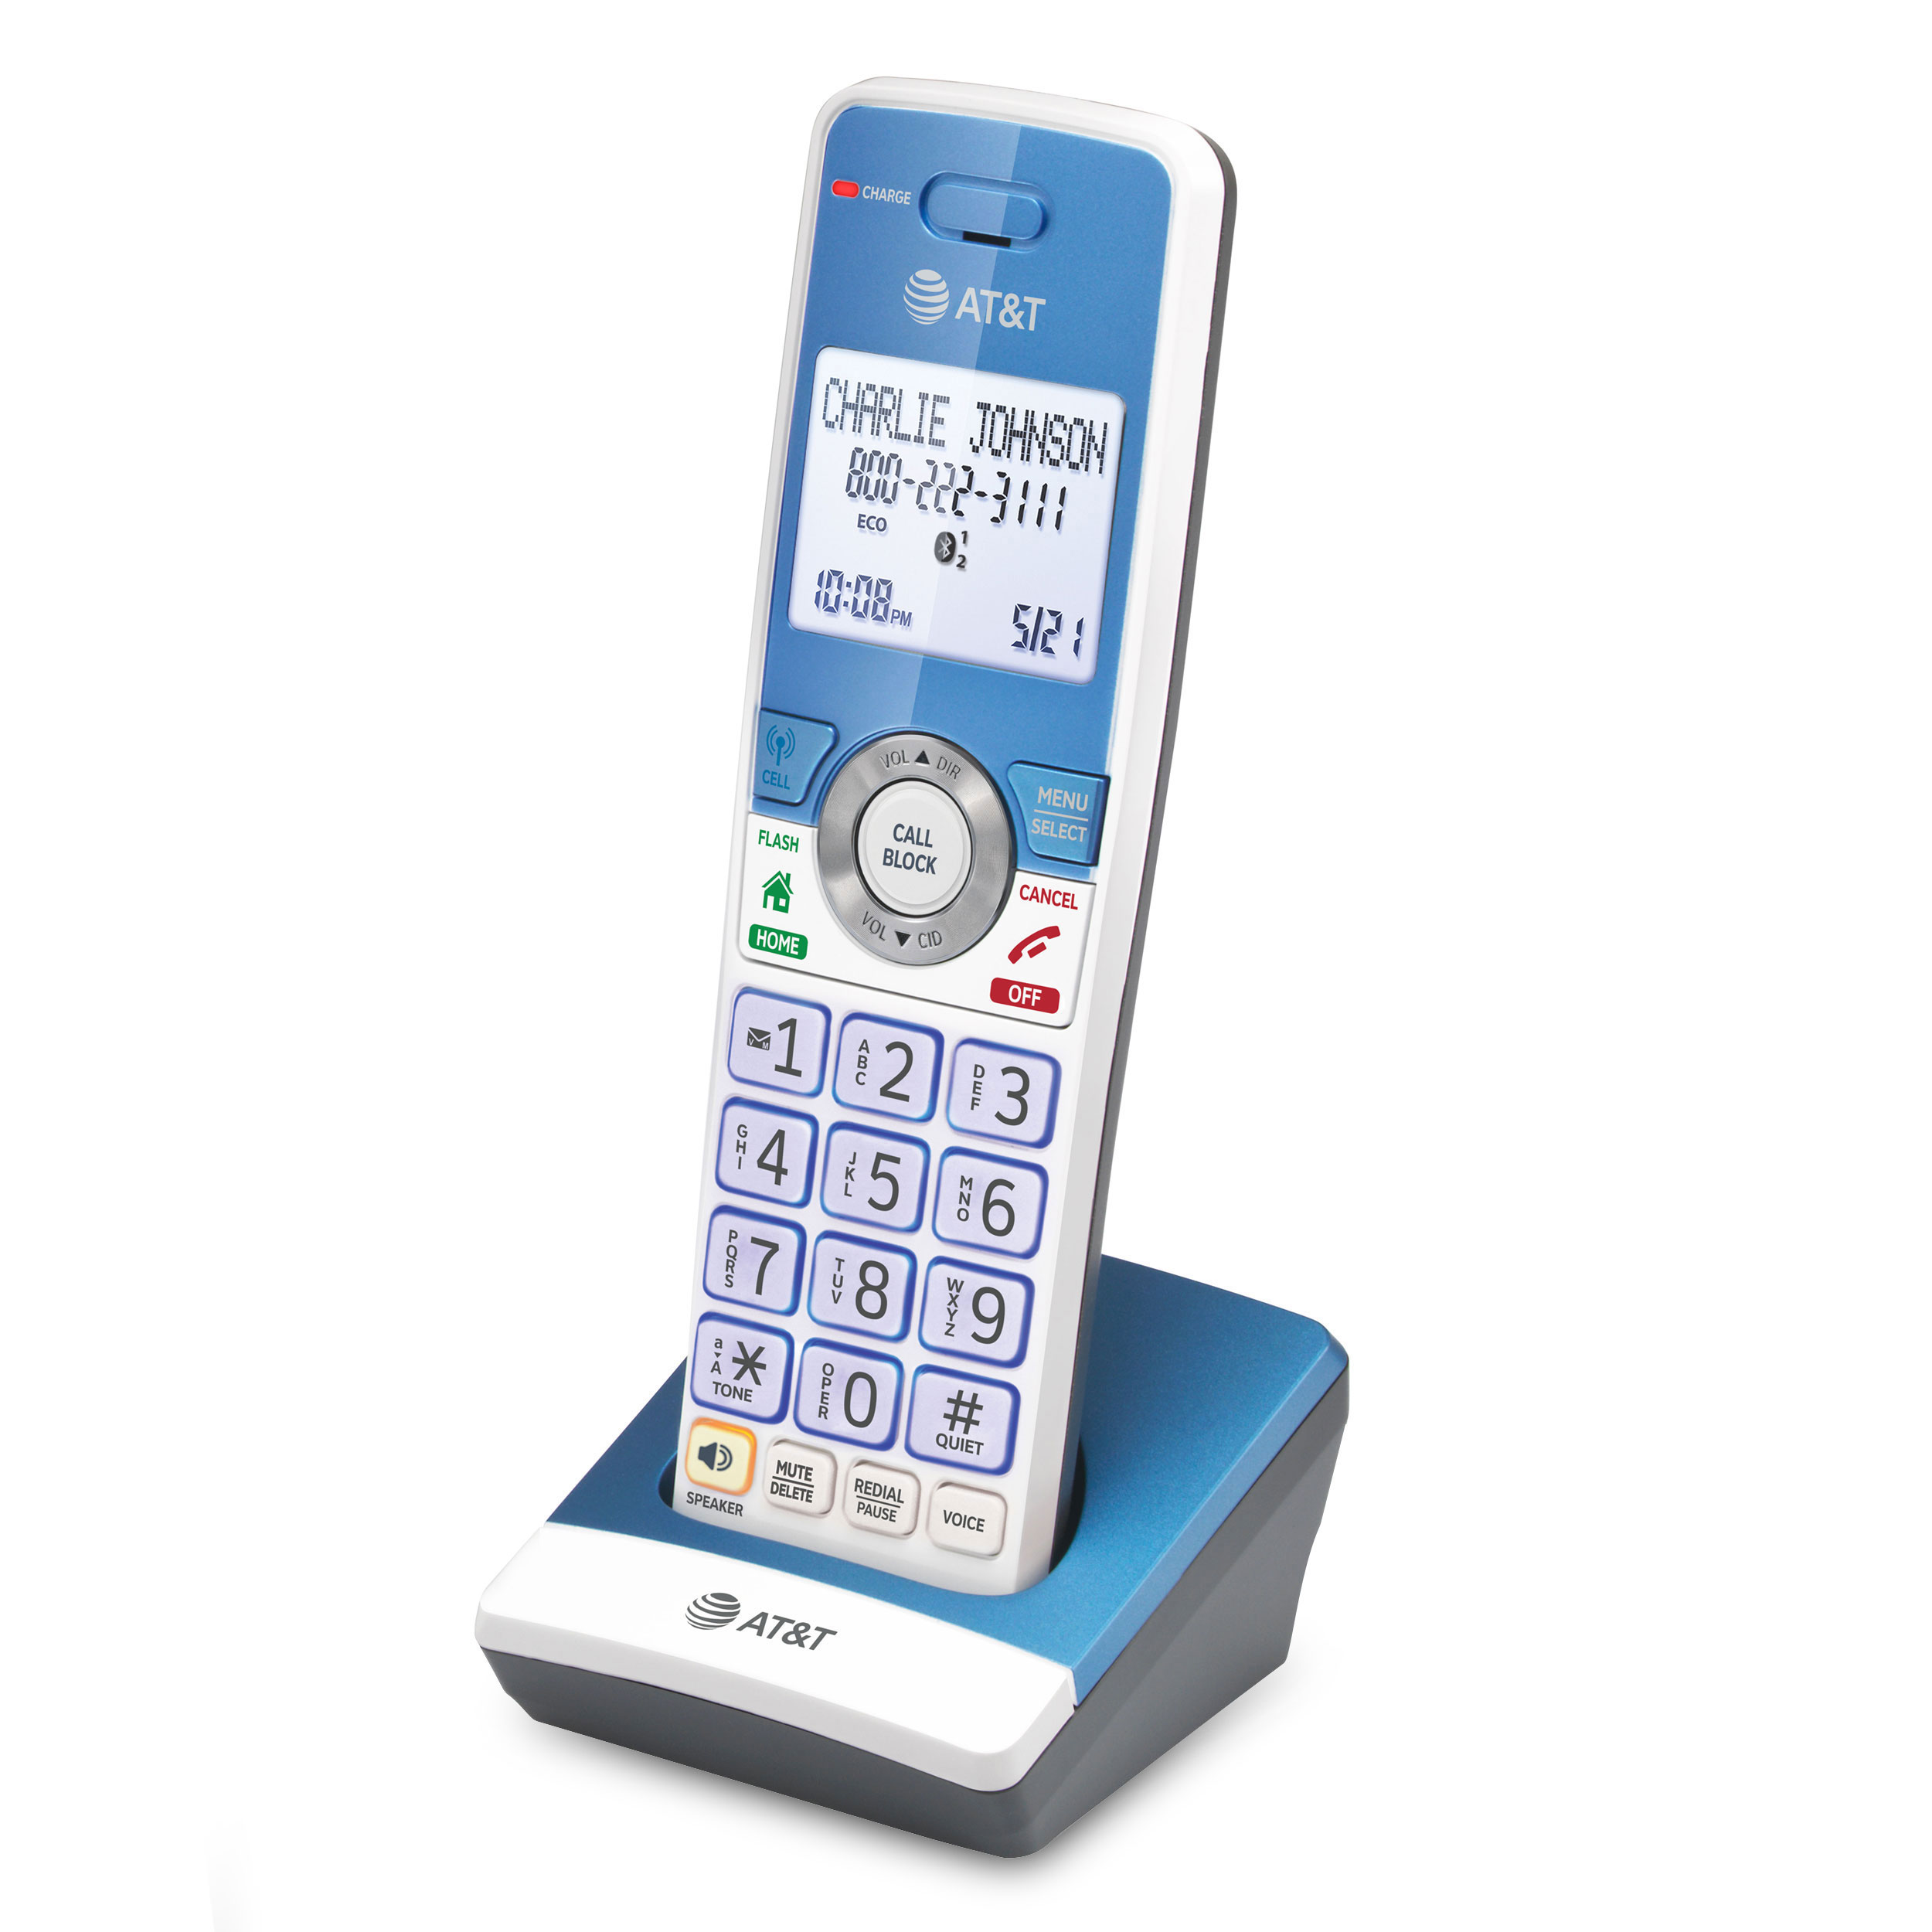 5-Handset Expandable Cordless Phone with Unsurpassed Range, Bluetooth Connect to Cell™, Smart Call Blocker and Answering System - view 7